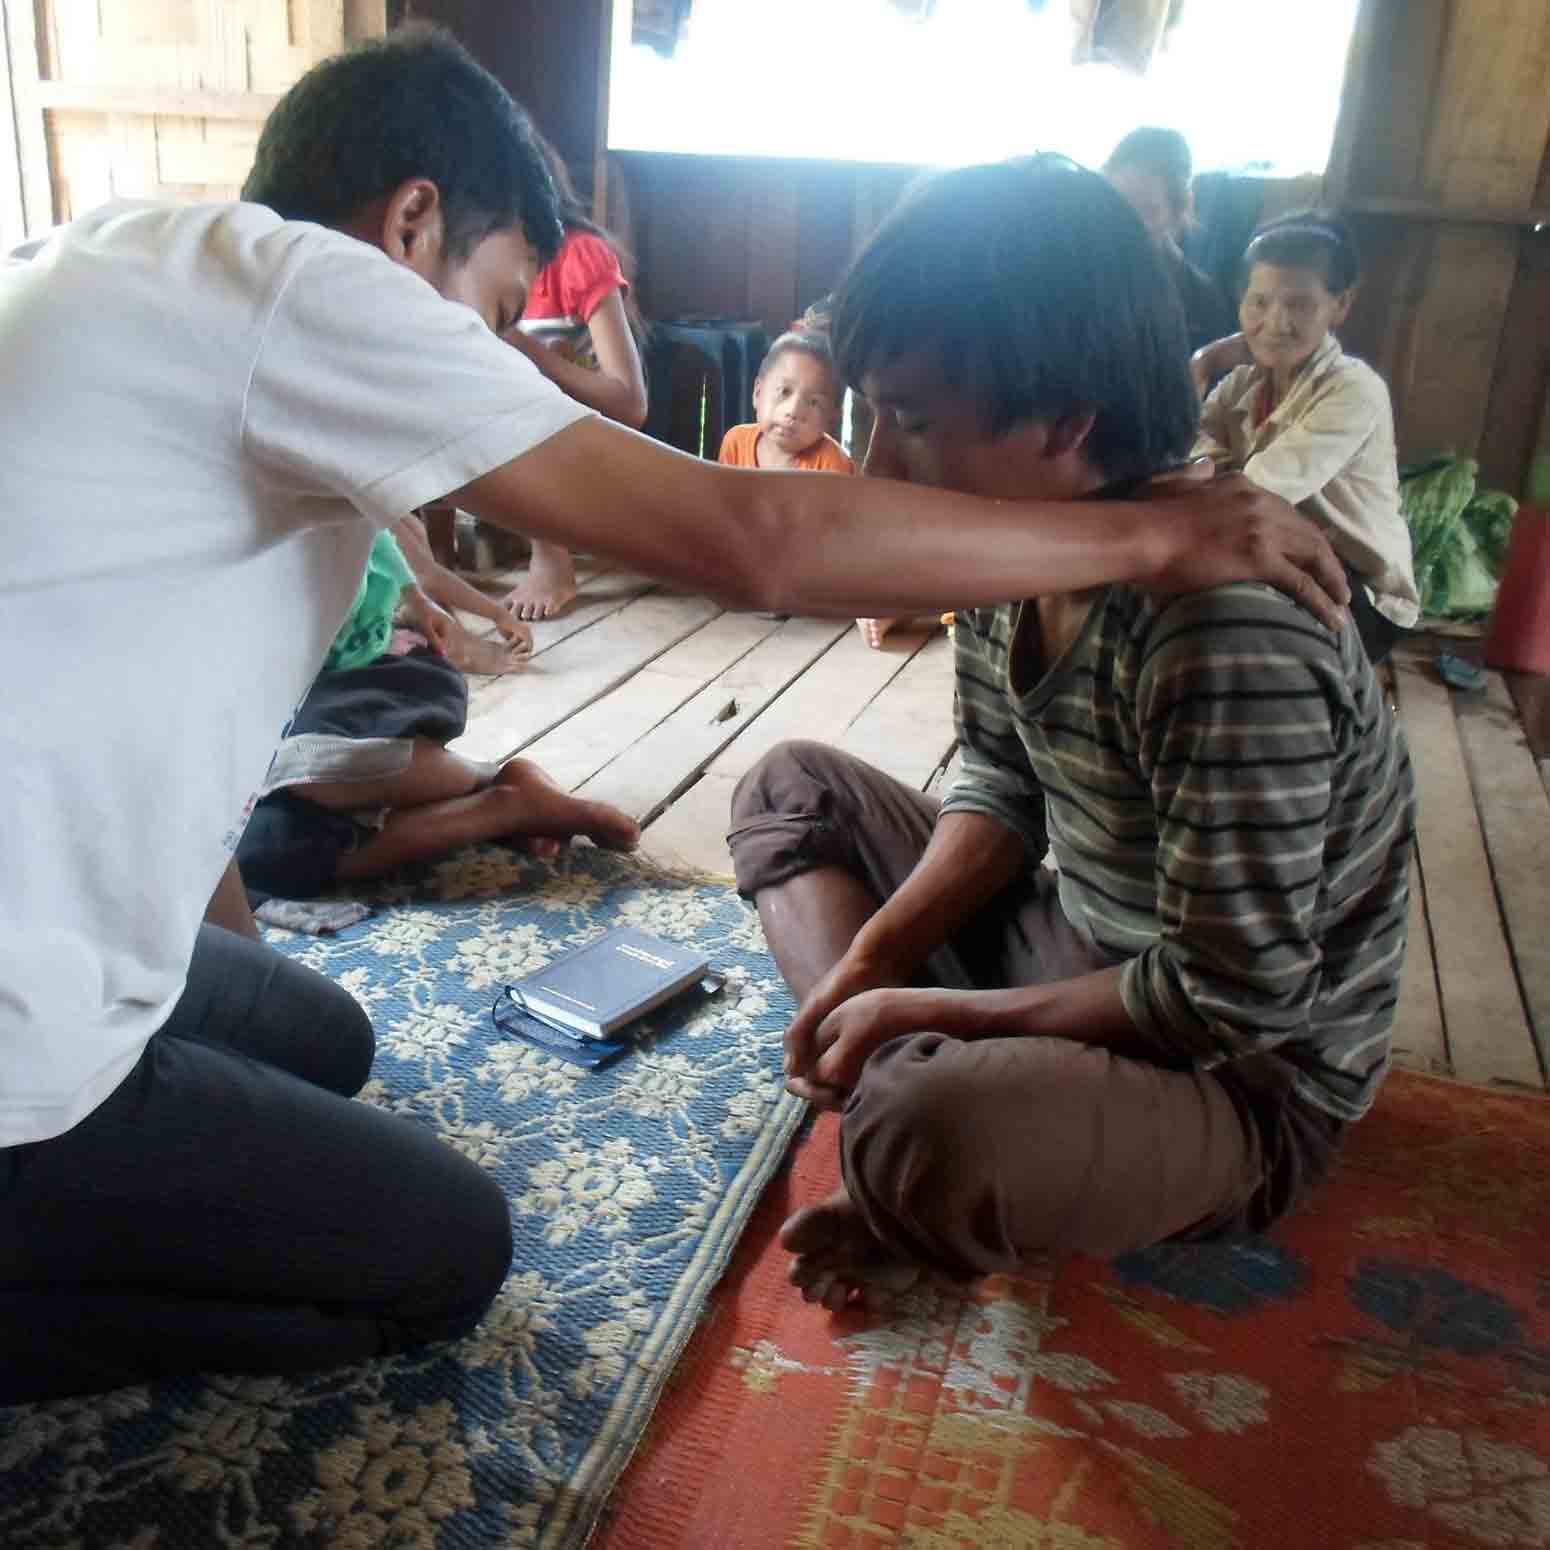 LAOS | JUL. 17, 2020 — Authorities Hold Church Leader Without Charges Because of Coronavirus